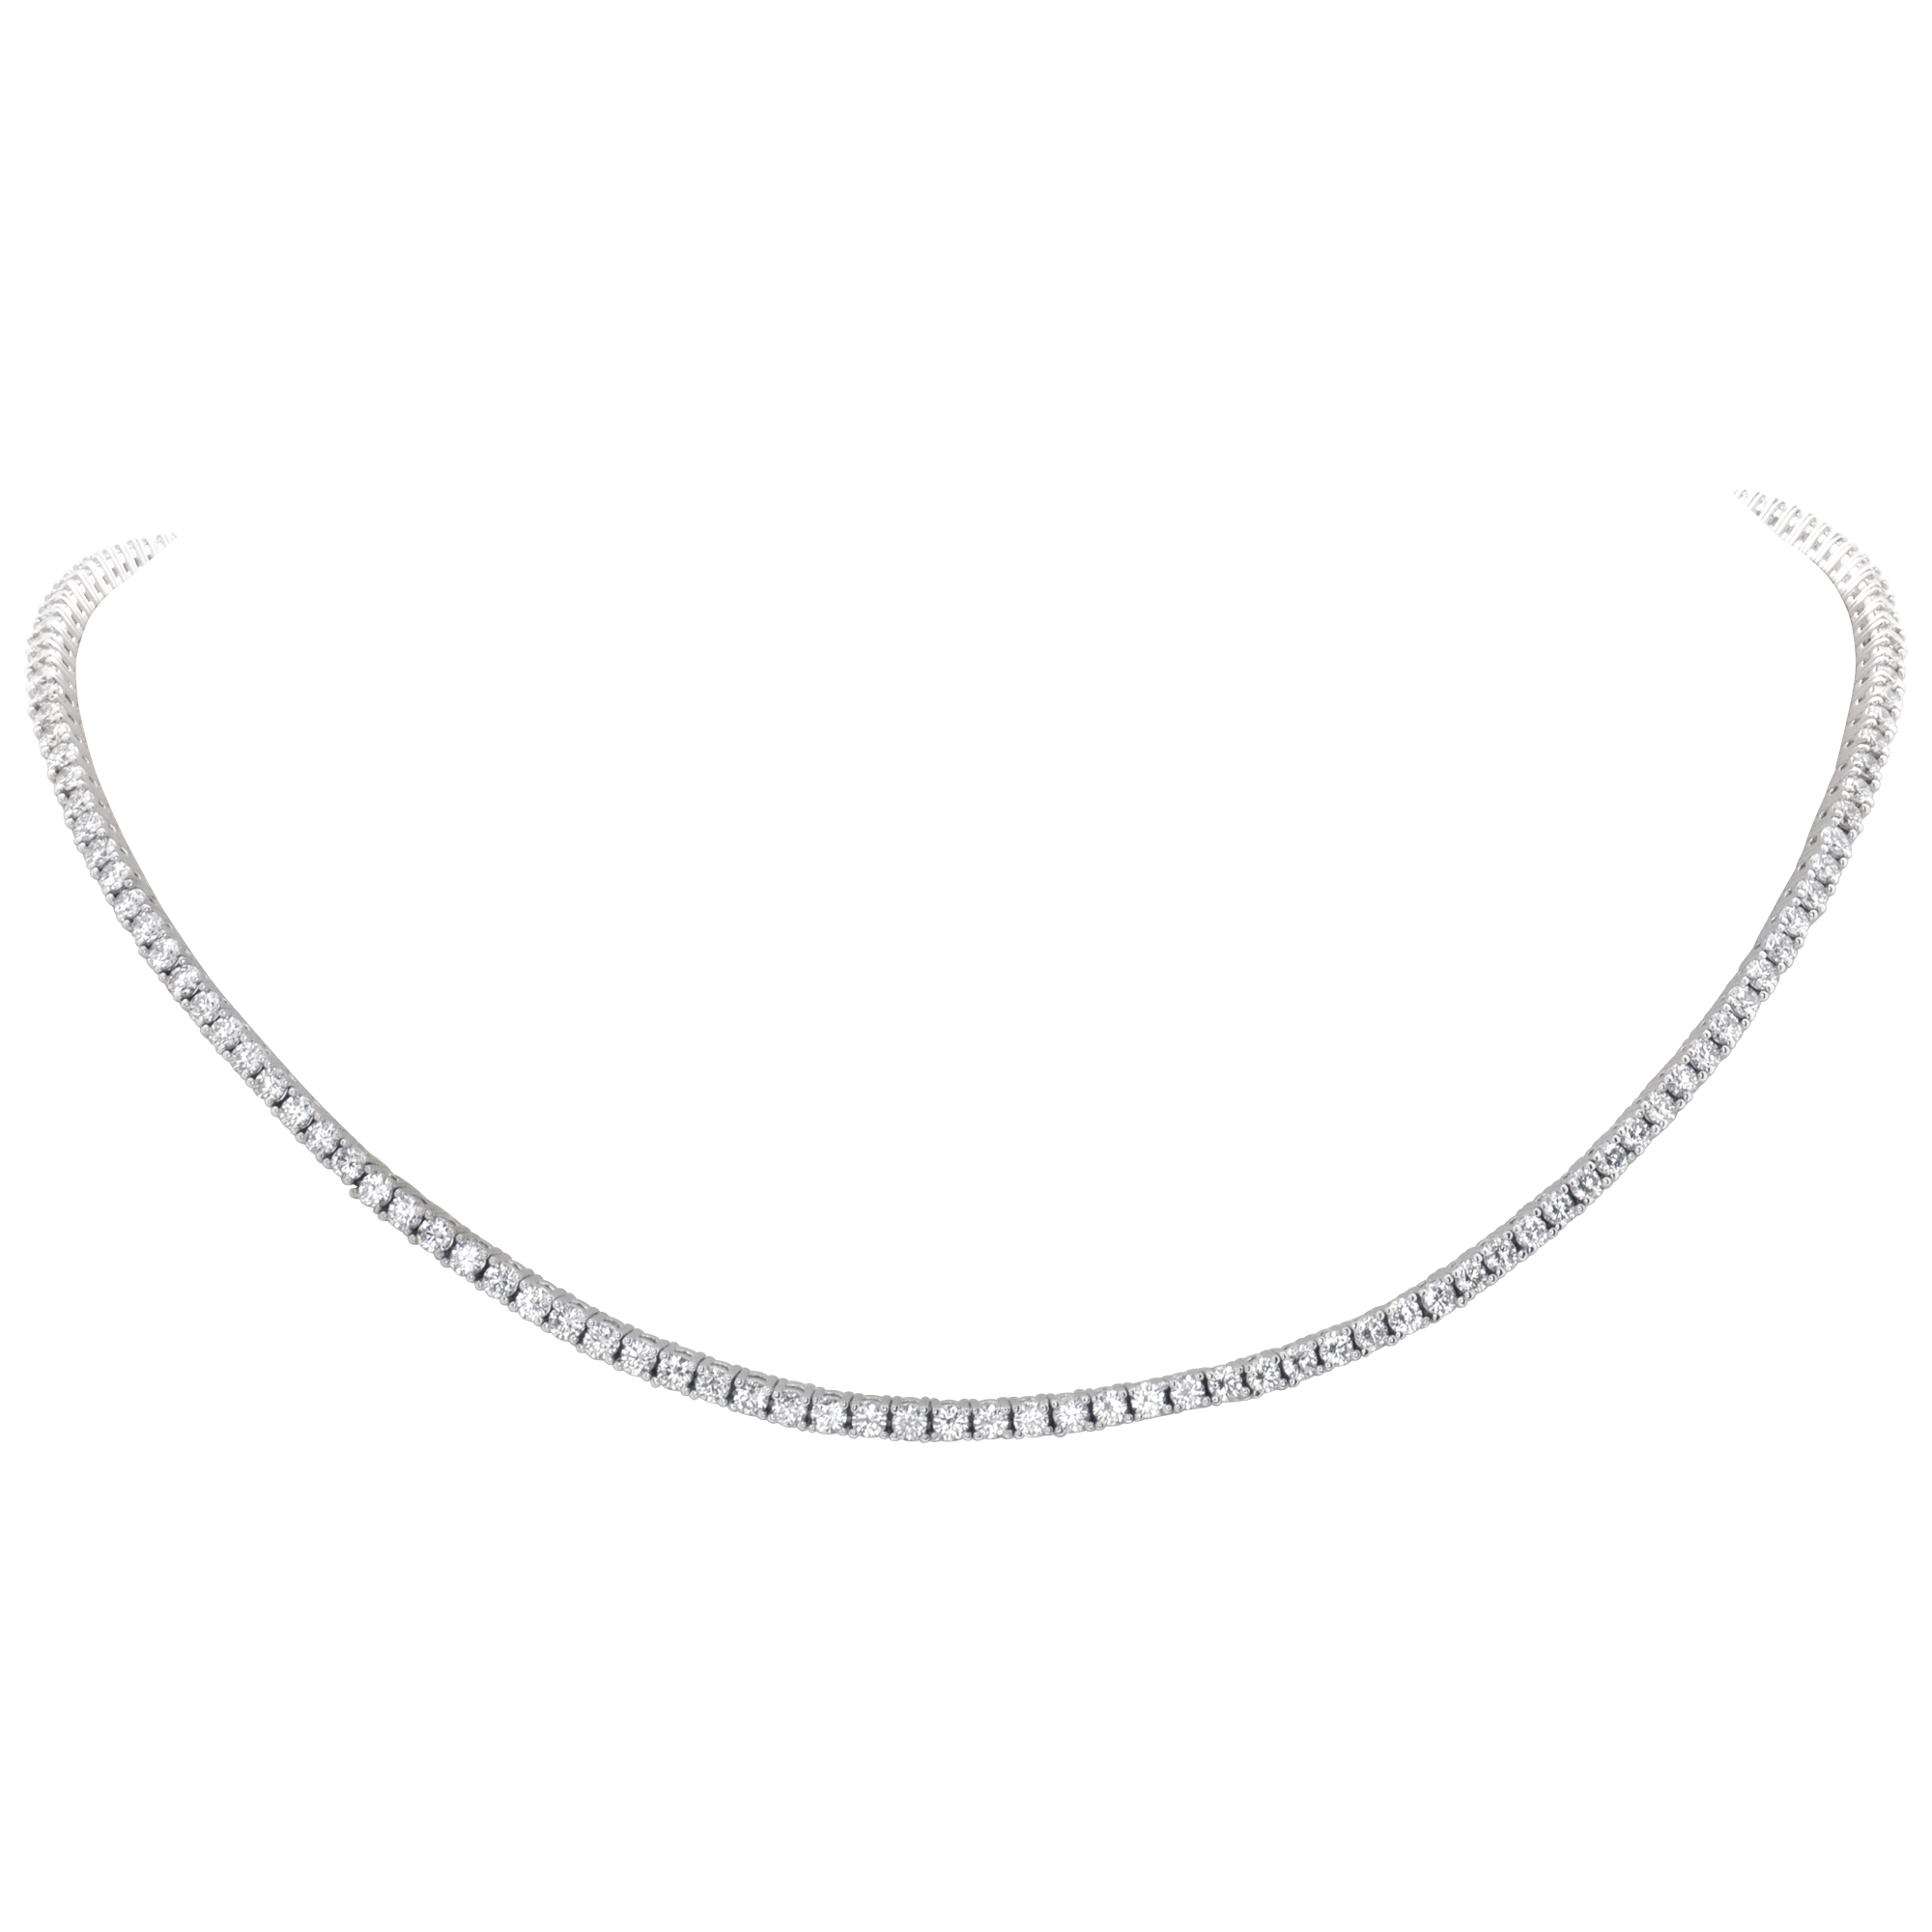 Tennis diamond necklace with 7.82 carats in diamonds